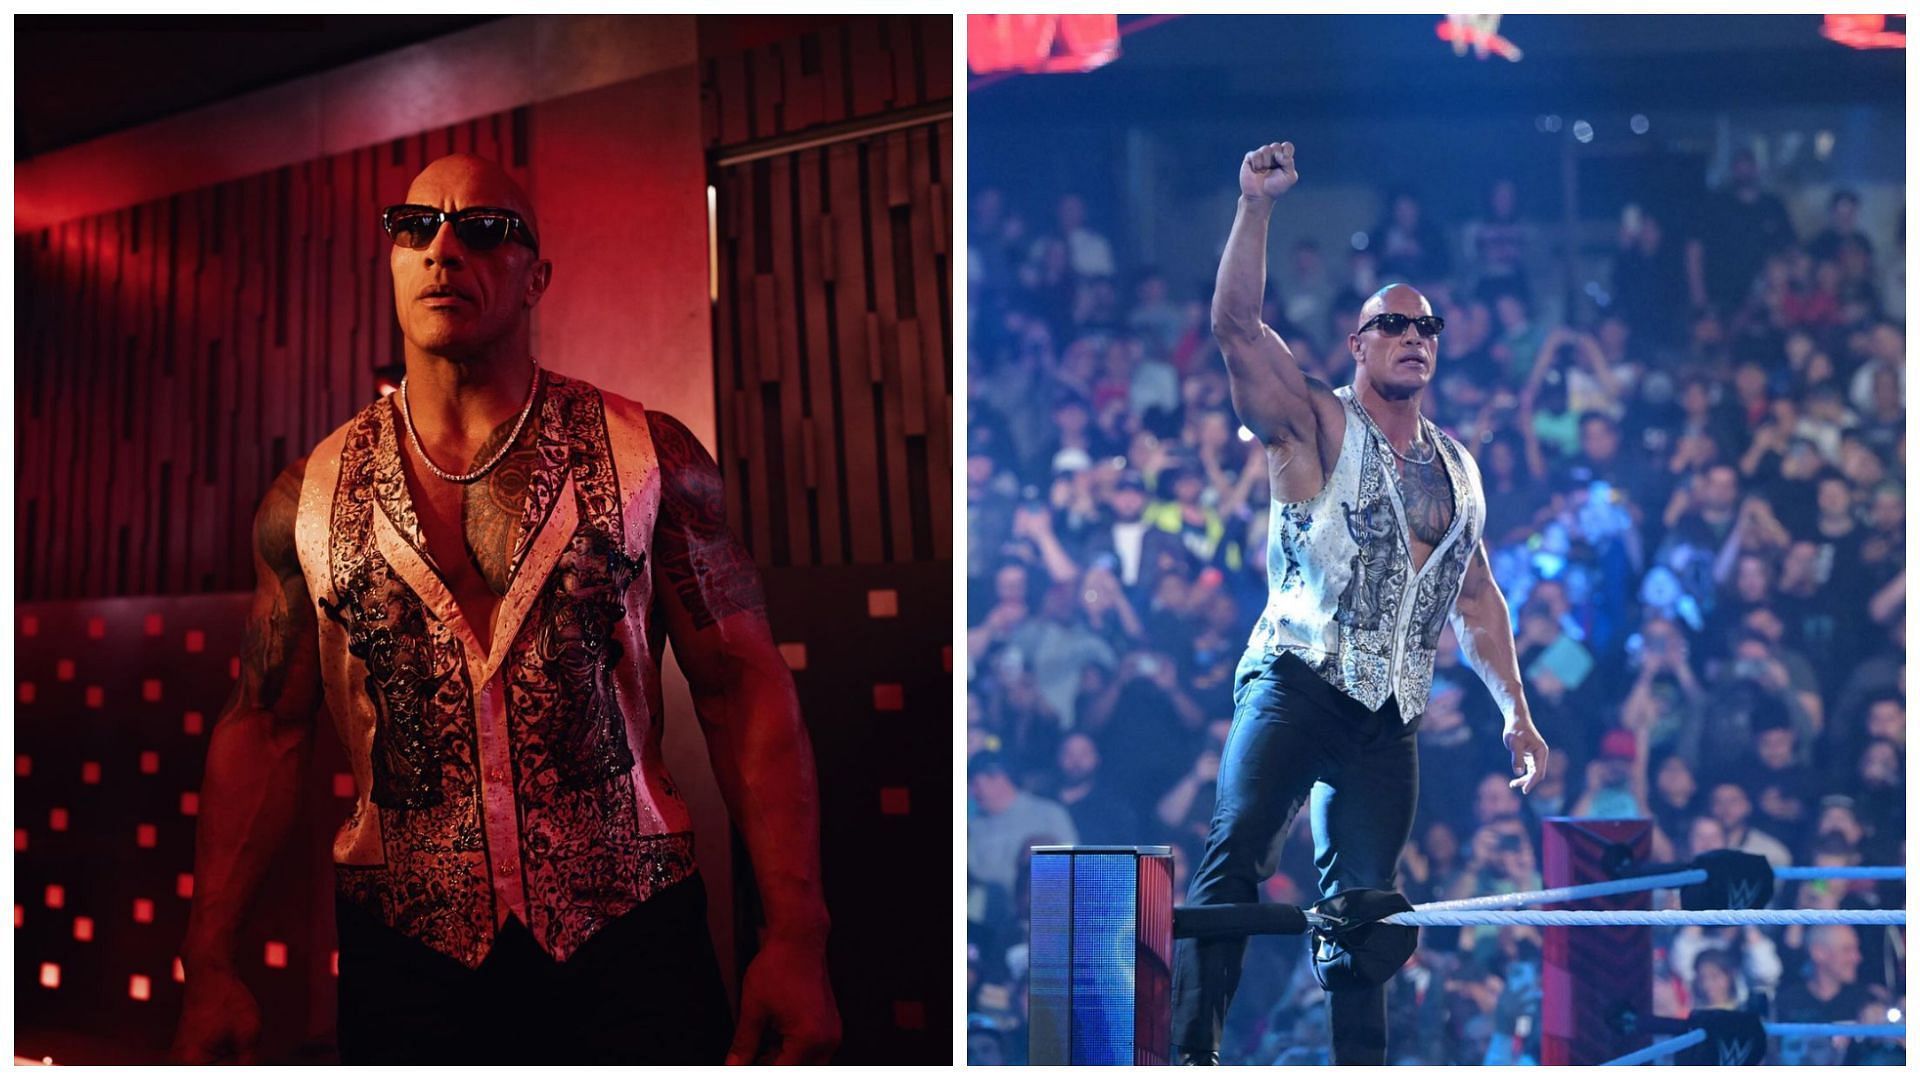 The Rock is the newest member of The Bloodline in WWE.